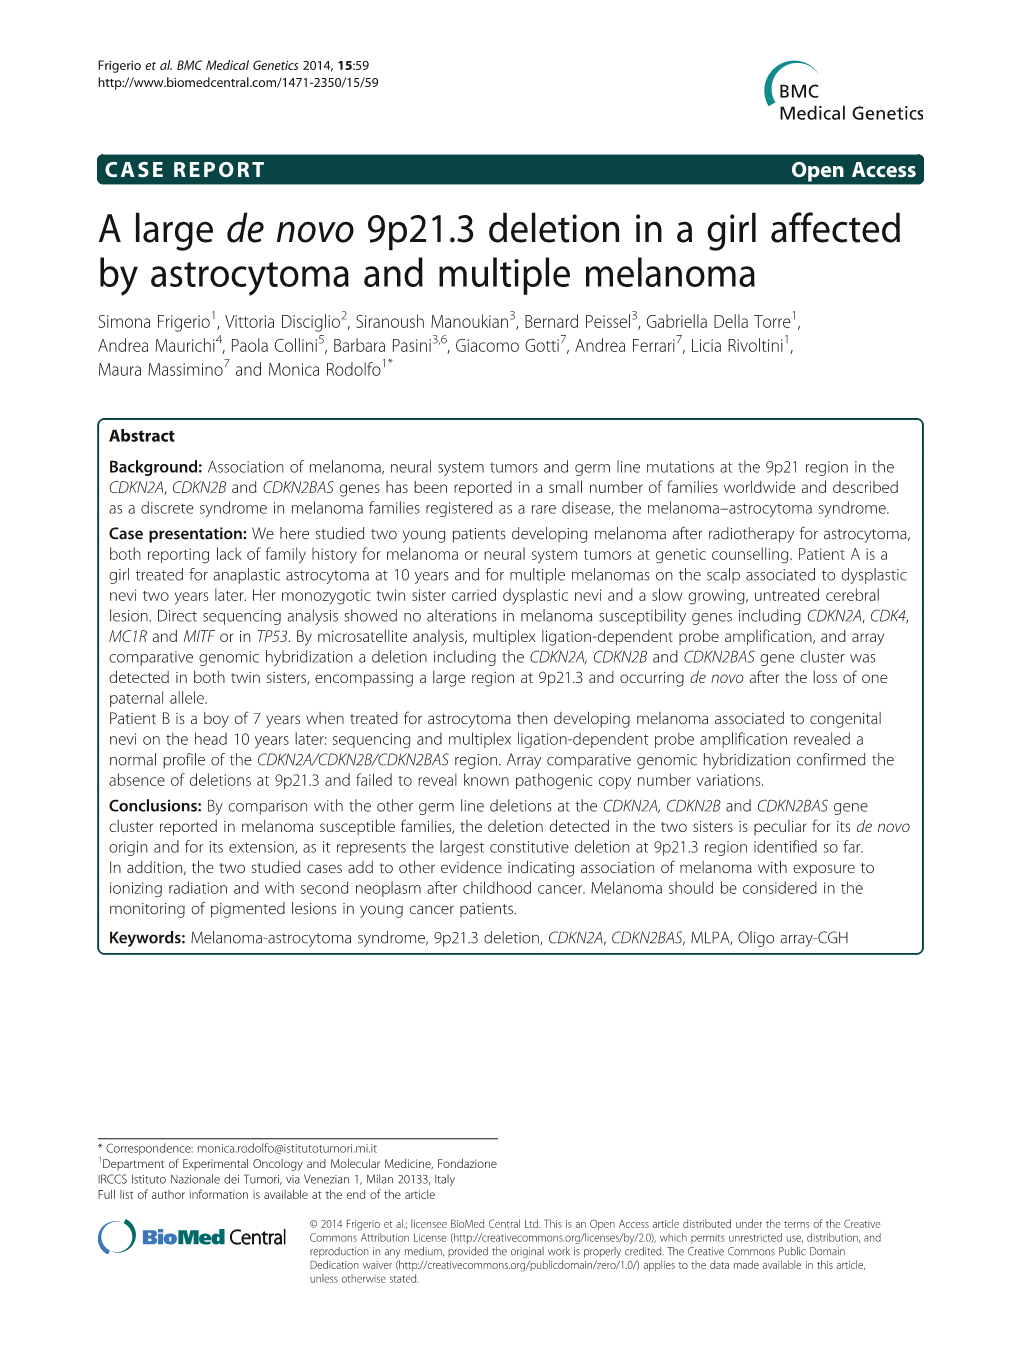 A Large De Novo 9P21.3 Deletion in a Girl Affected by Astrocytoma And